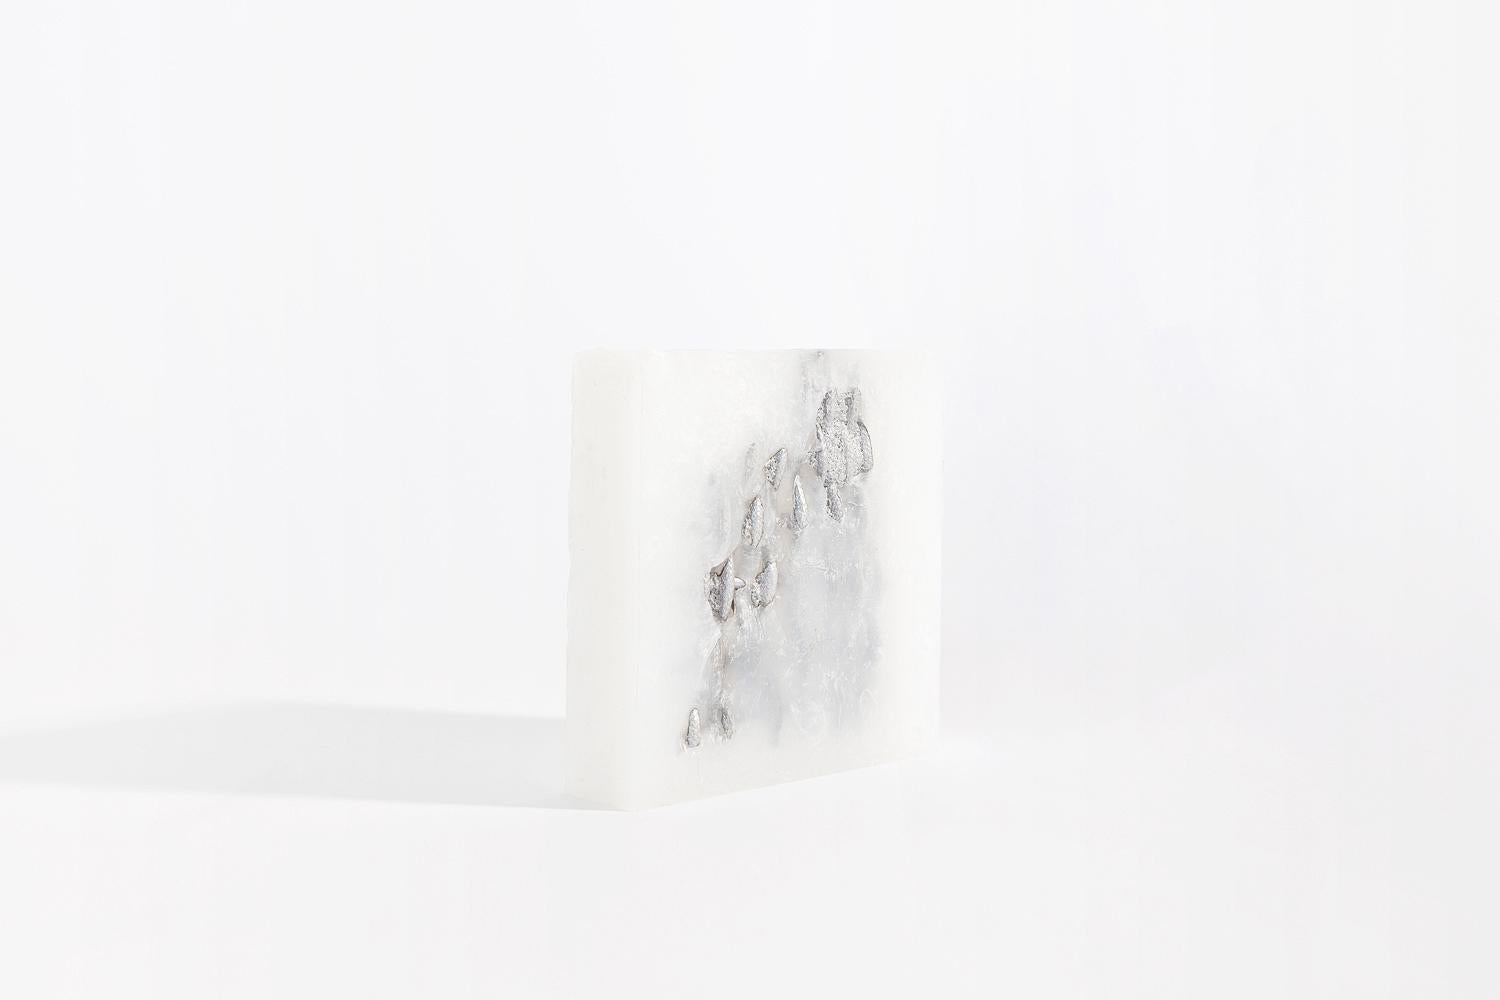 Post-Modern Contemporary Metal Cast Sculpture, Aluminium Cast in Silicone 5 by Mimi Jung For Sale